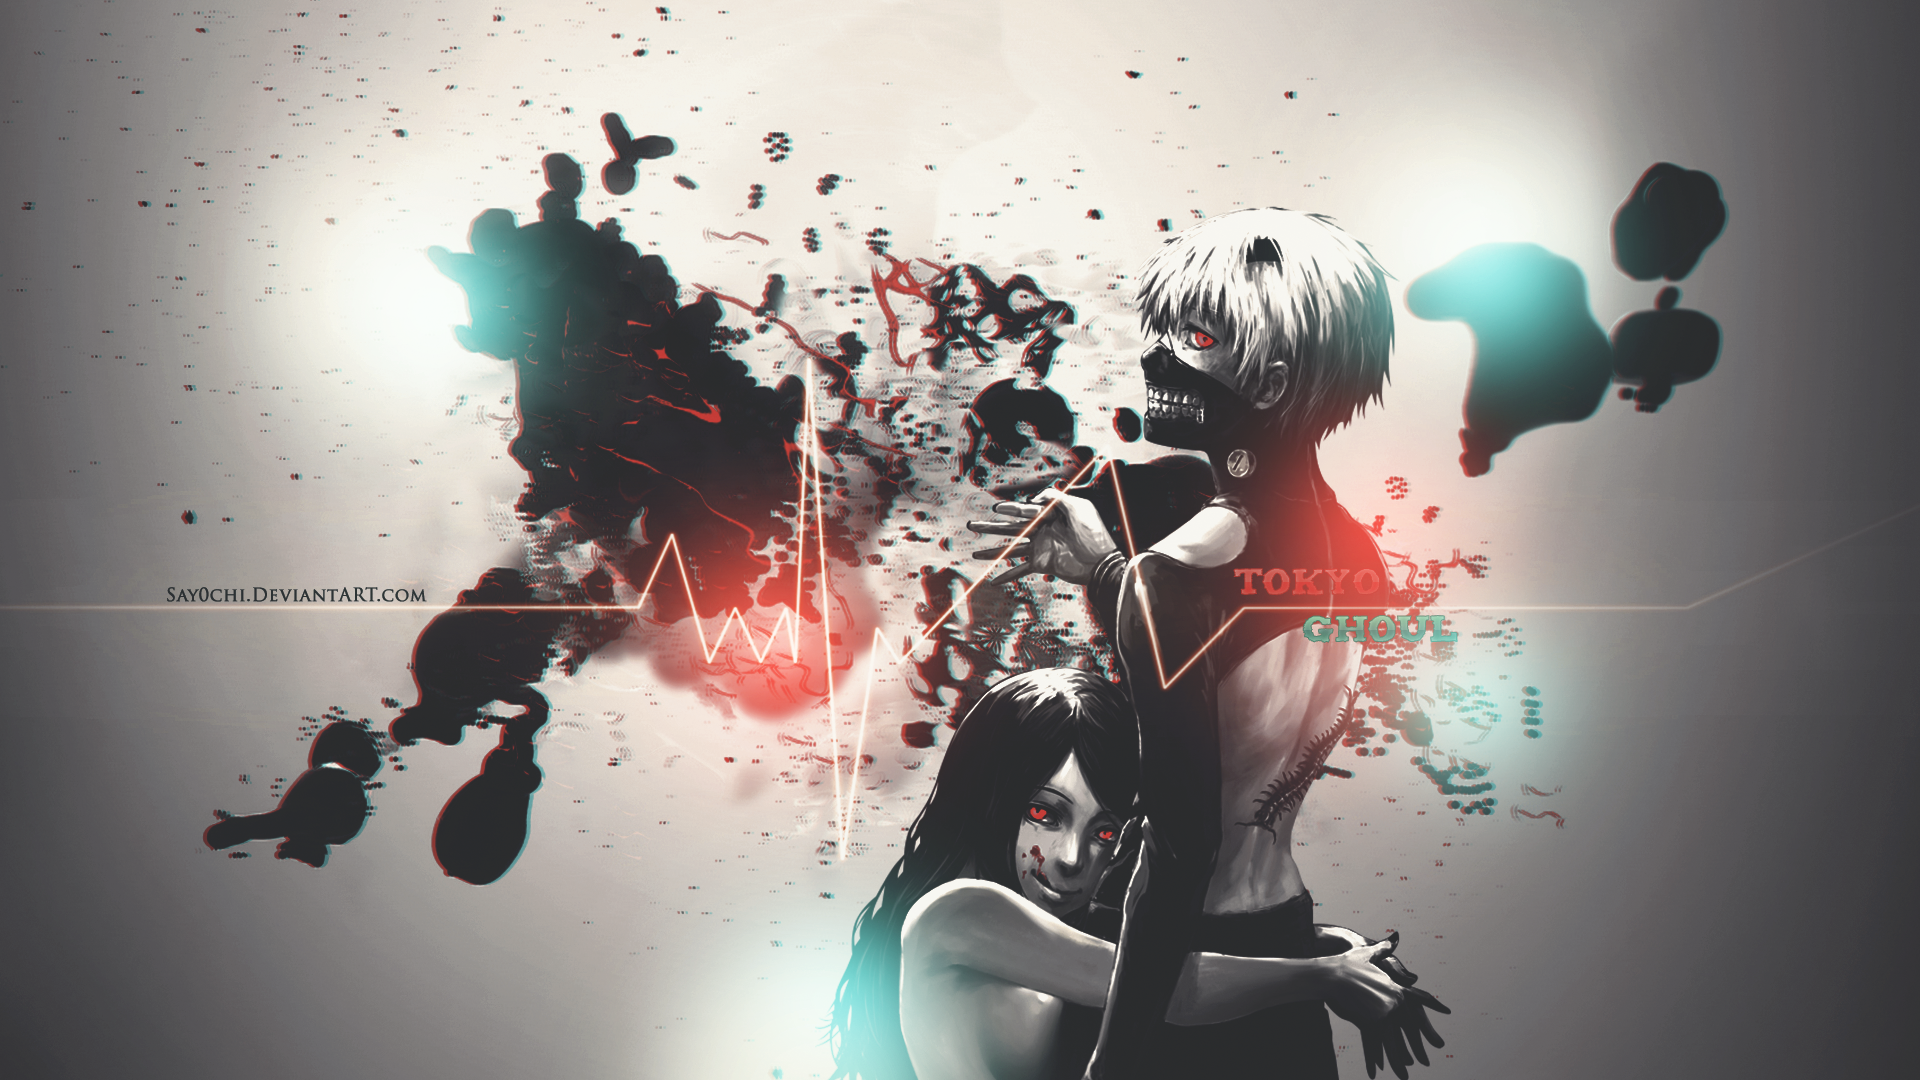 Tokyo Ghoul Wallpaper 1920 x 1080 [HD] by Say0chi 1920x1080